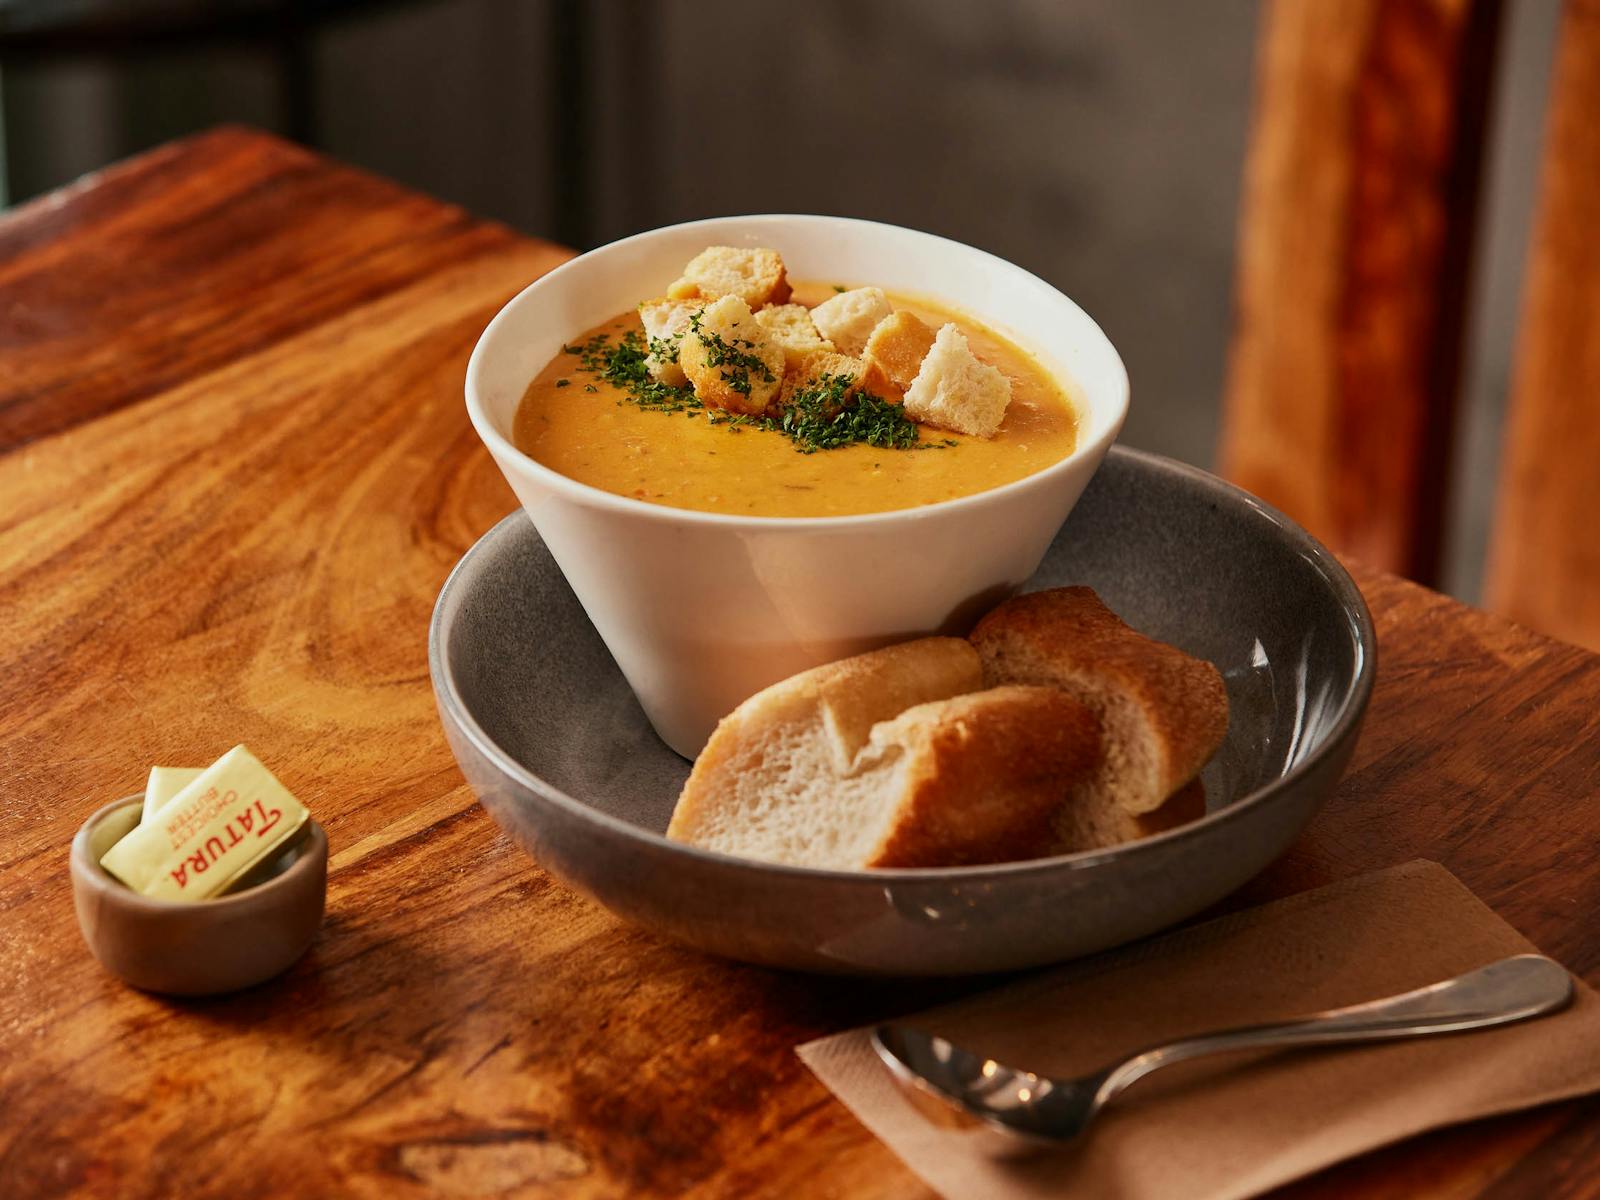 A bowl of seafood chowder served with bread and butter